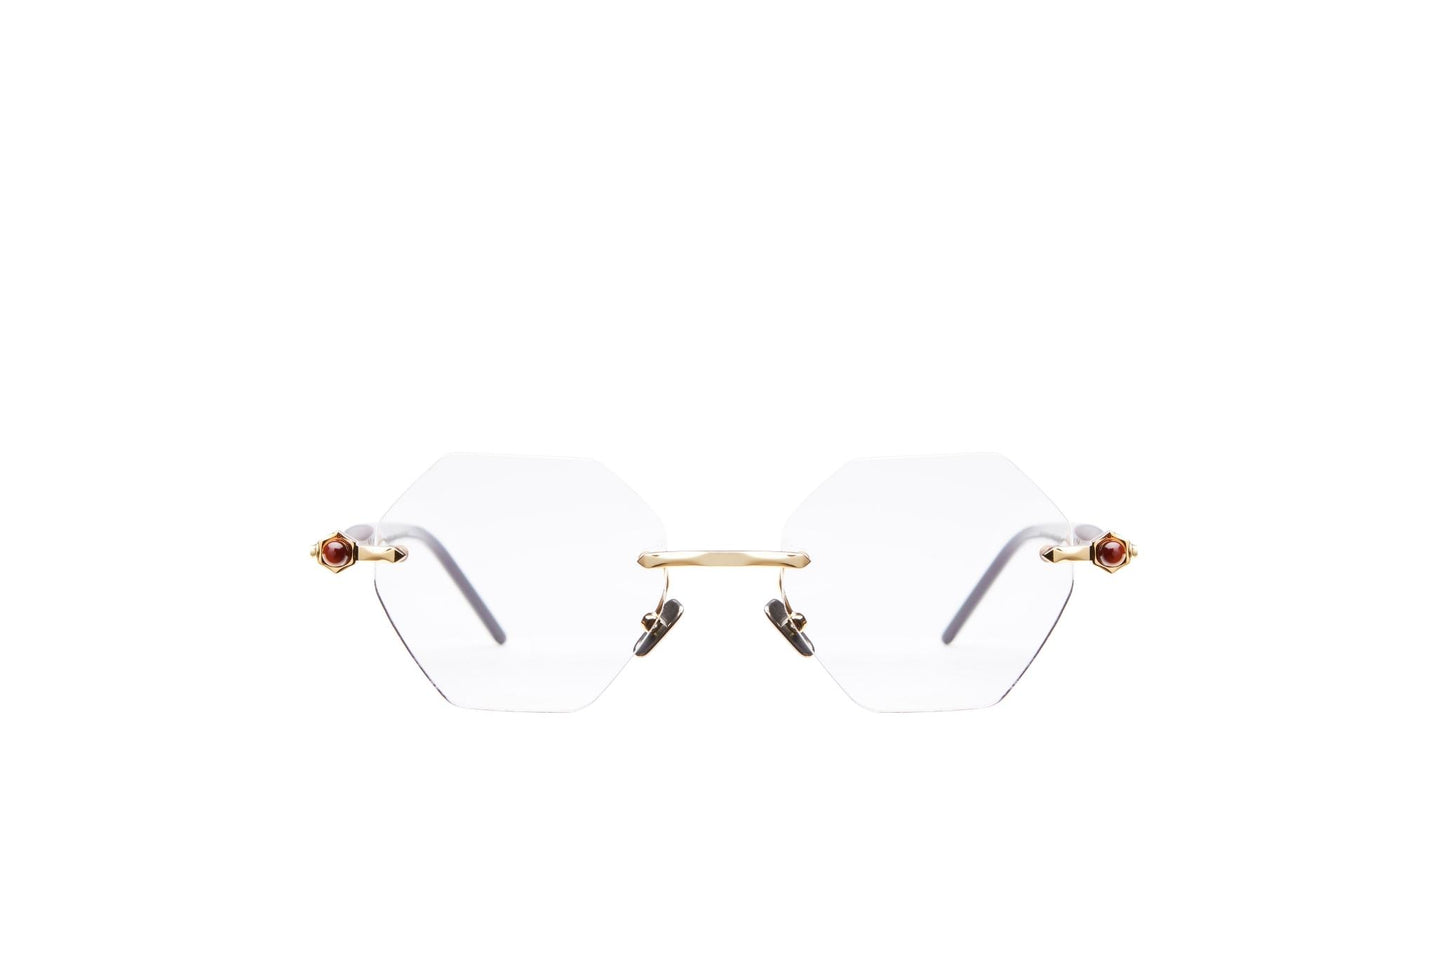 <p>Kuboraum  MASKE P54 is a  Gold; Metal, Acetate rimless Optical  Frame with a  shape.  </p><p>Shop with confidence from Adair Eyewear, a Kuboraum Authorized Dealer.  We have provided the best in customer service and great designer eyewear for over 40 years. Visit https://adaireyewearonline.com</p>